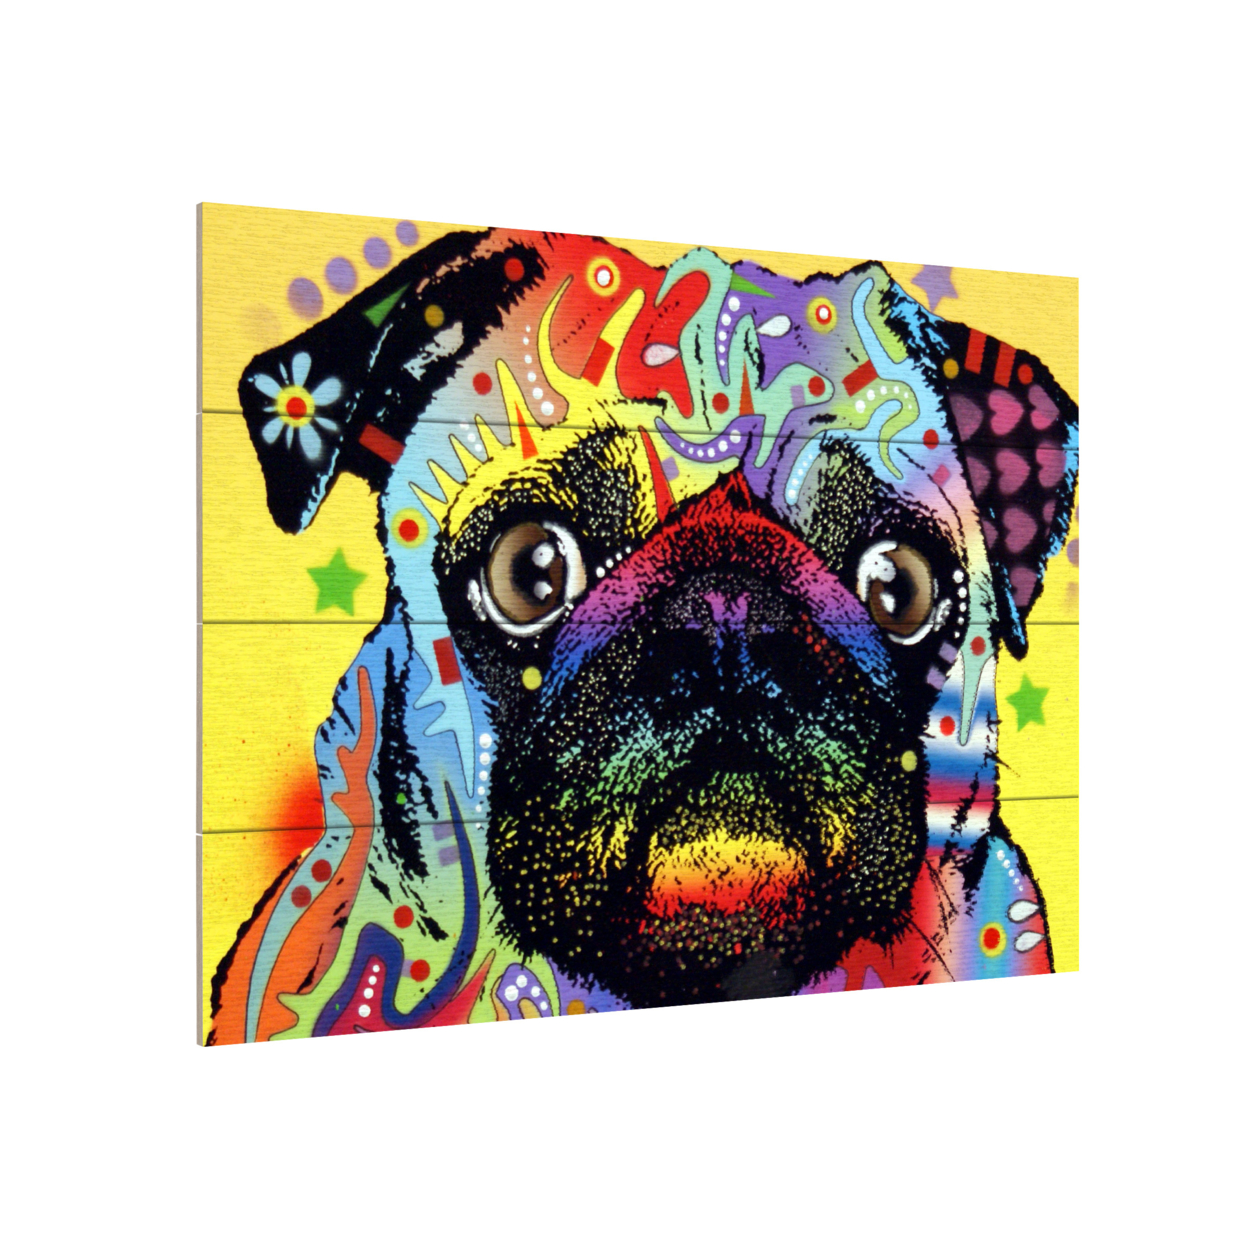 Wall Art 12 X 16 Inches Titled Pug Ready To Hang Printed On Wooden Planks